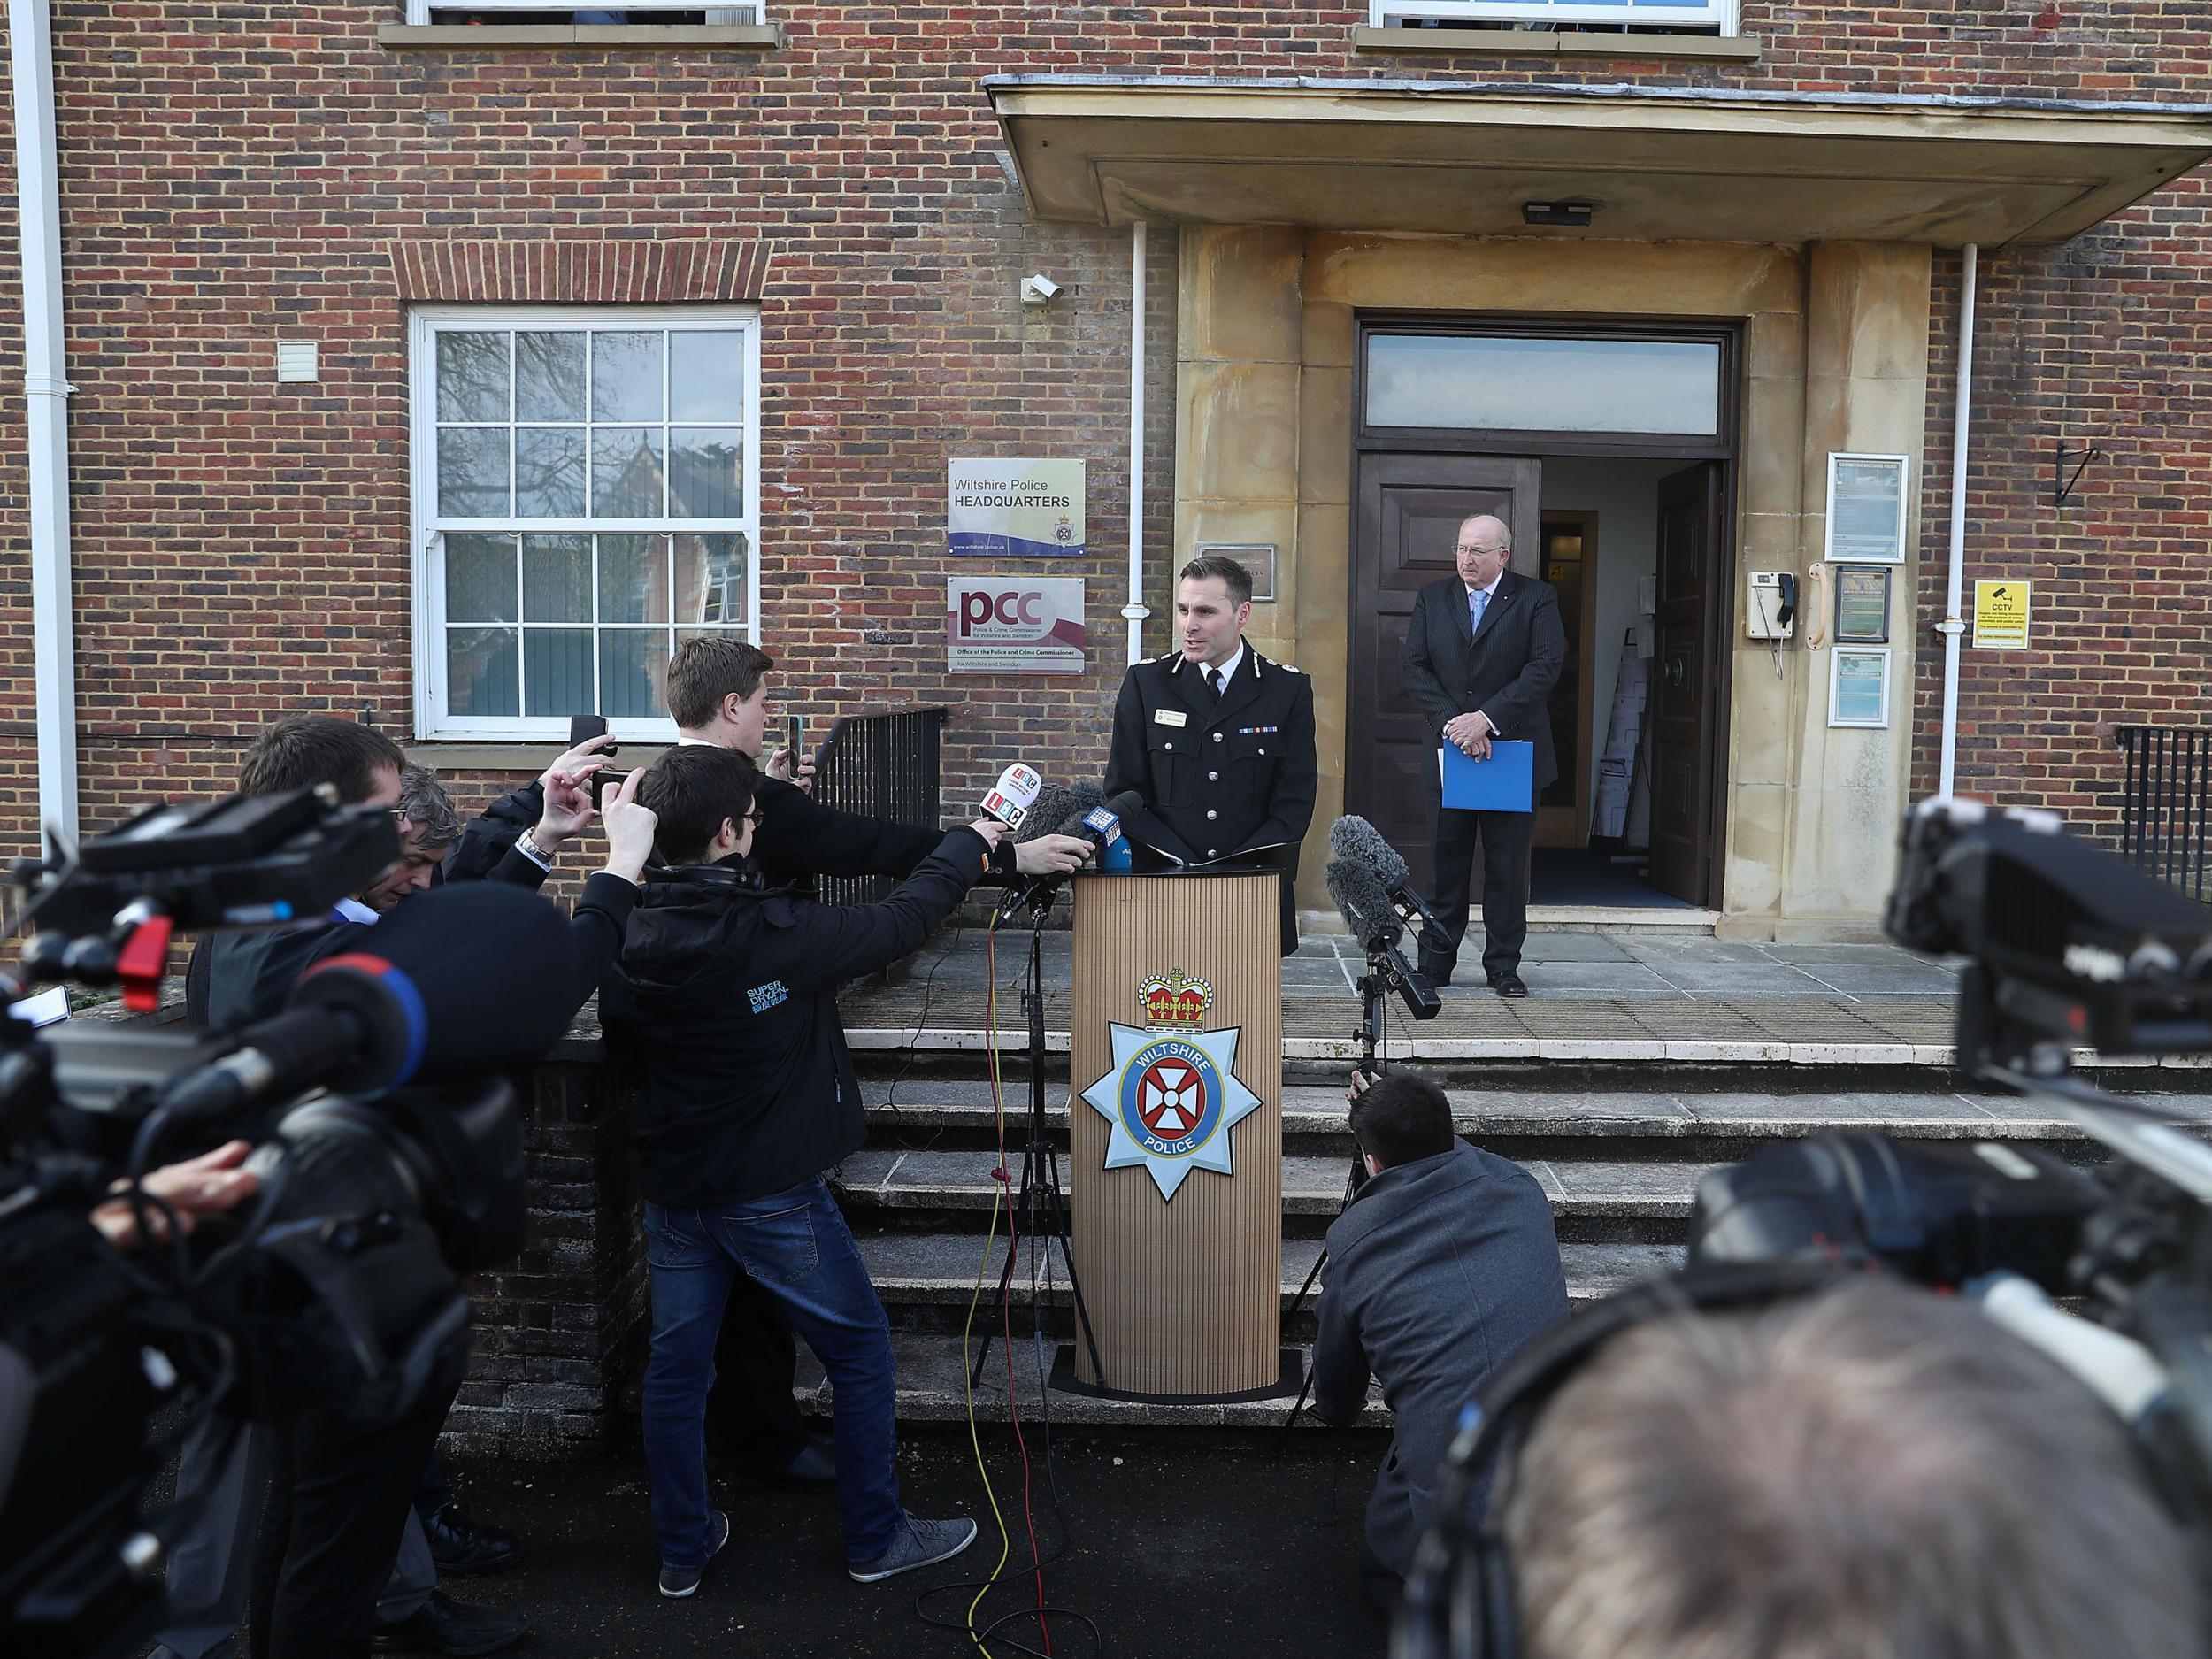 Wiltshire Police Assistant Chief Constable Kier Pritchard speaking at a press conference outside Wiltshire Police Headquarters in Devizes after double agent Sergei Skripal was found critically ill by exposure to an unknown substance in Salisbury